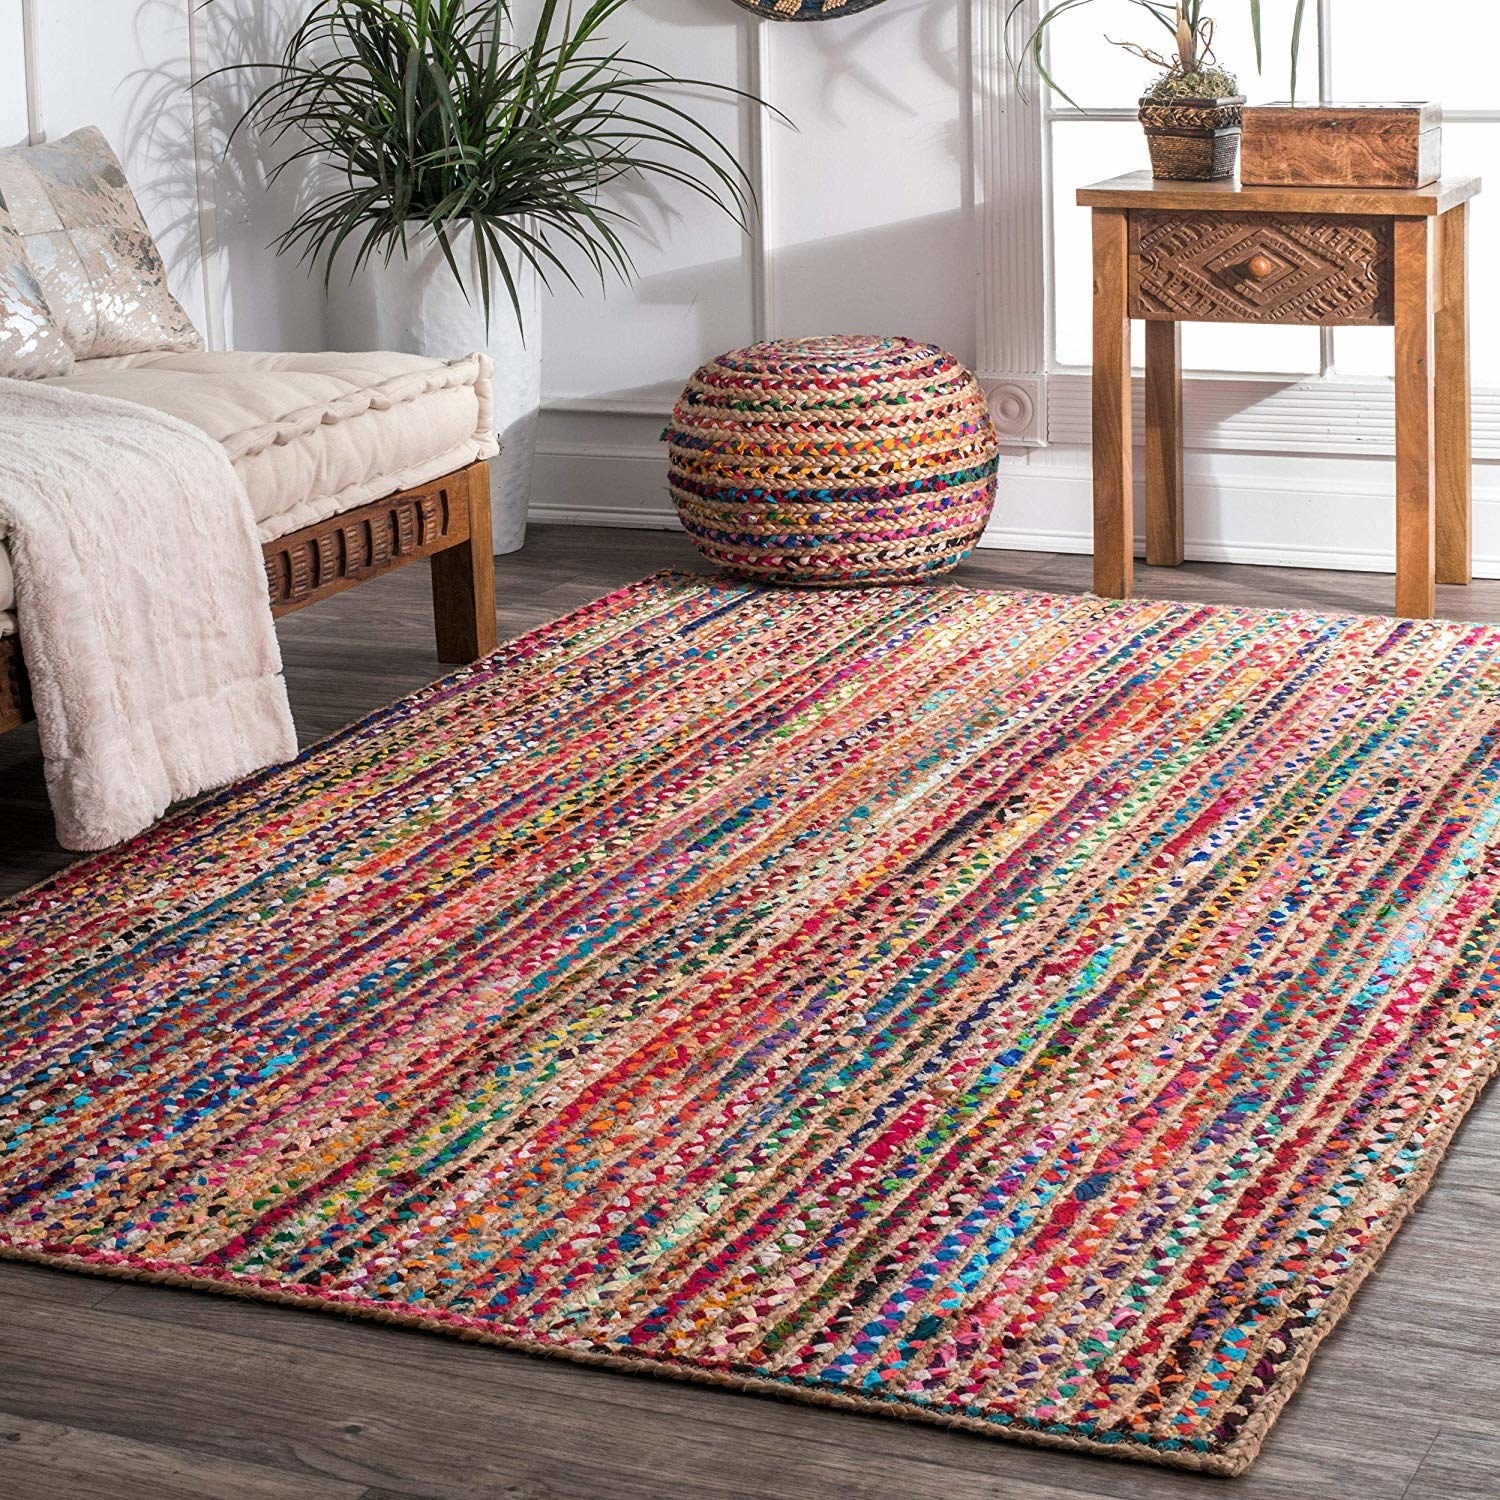 A colourful braided rug with jute and cotton placed on the floor